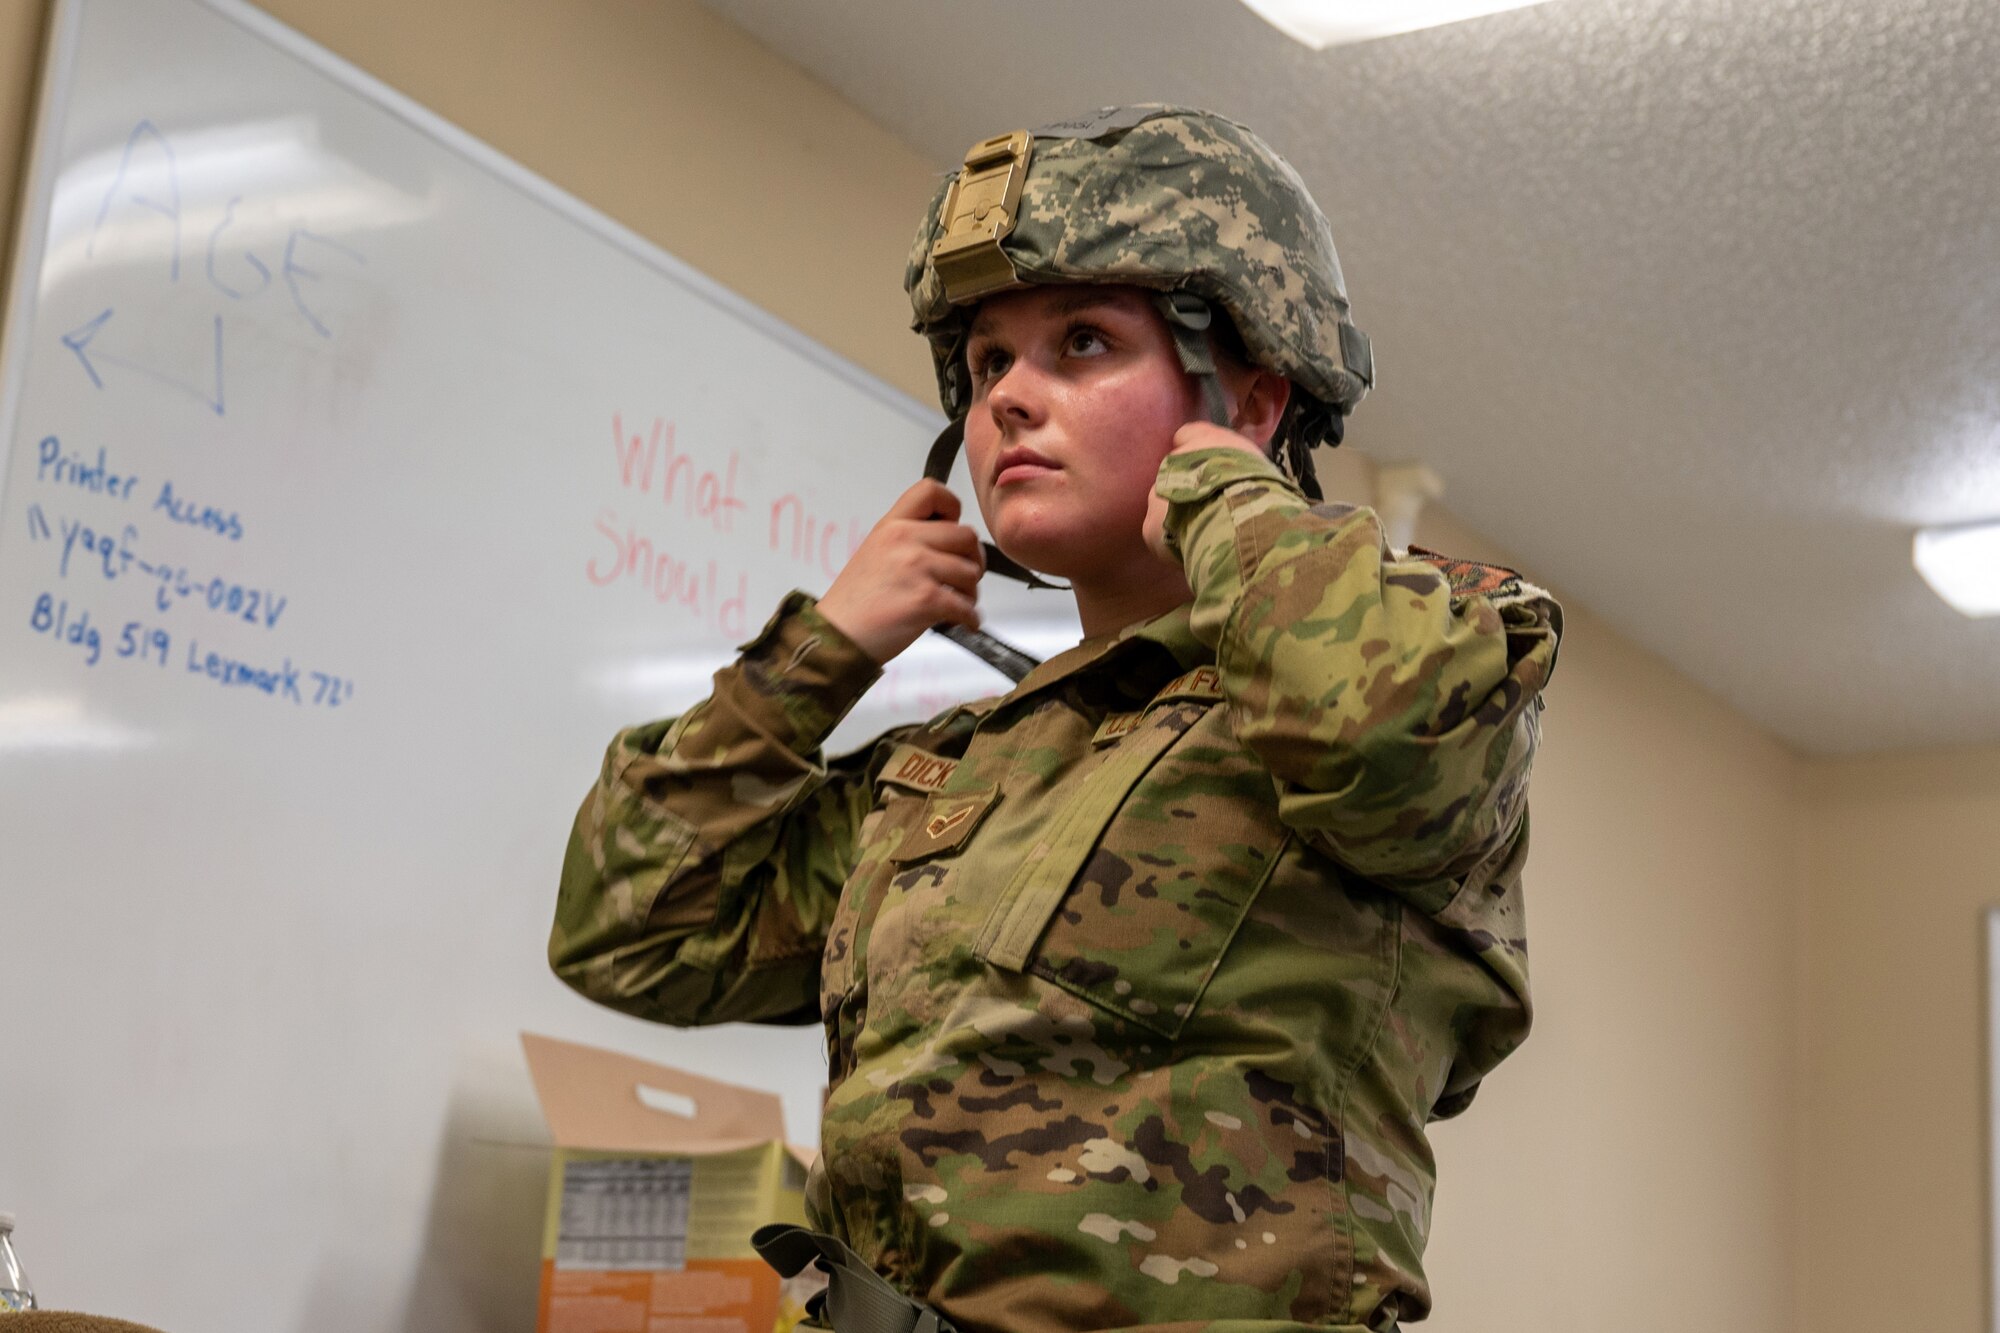 Senior Airman Tess Dickey, a 934th Maintenance Squadron aerospace ground equipment specialist, dons her helmet during an exercise at Volk Field Air National Guard Base, Wis., April 6, 2022. The exercise involves week-long training with the 934th personnel to maintain and display readiness. (U.S. Air Force photo by Staff Sgt. Timothy Leddick)